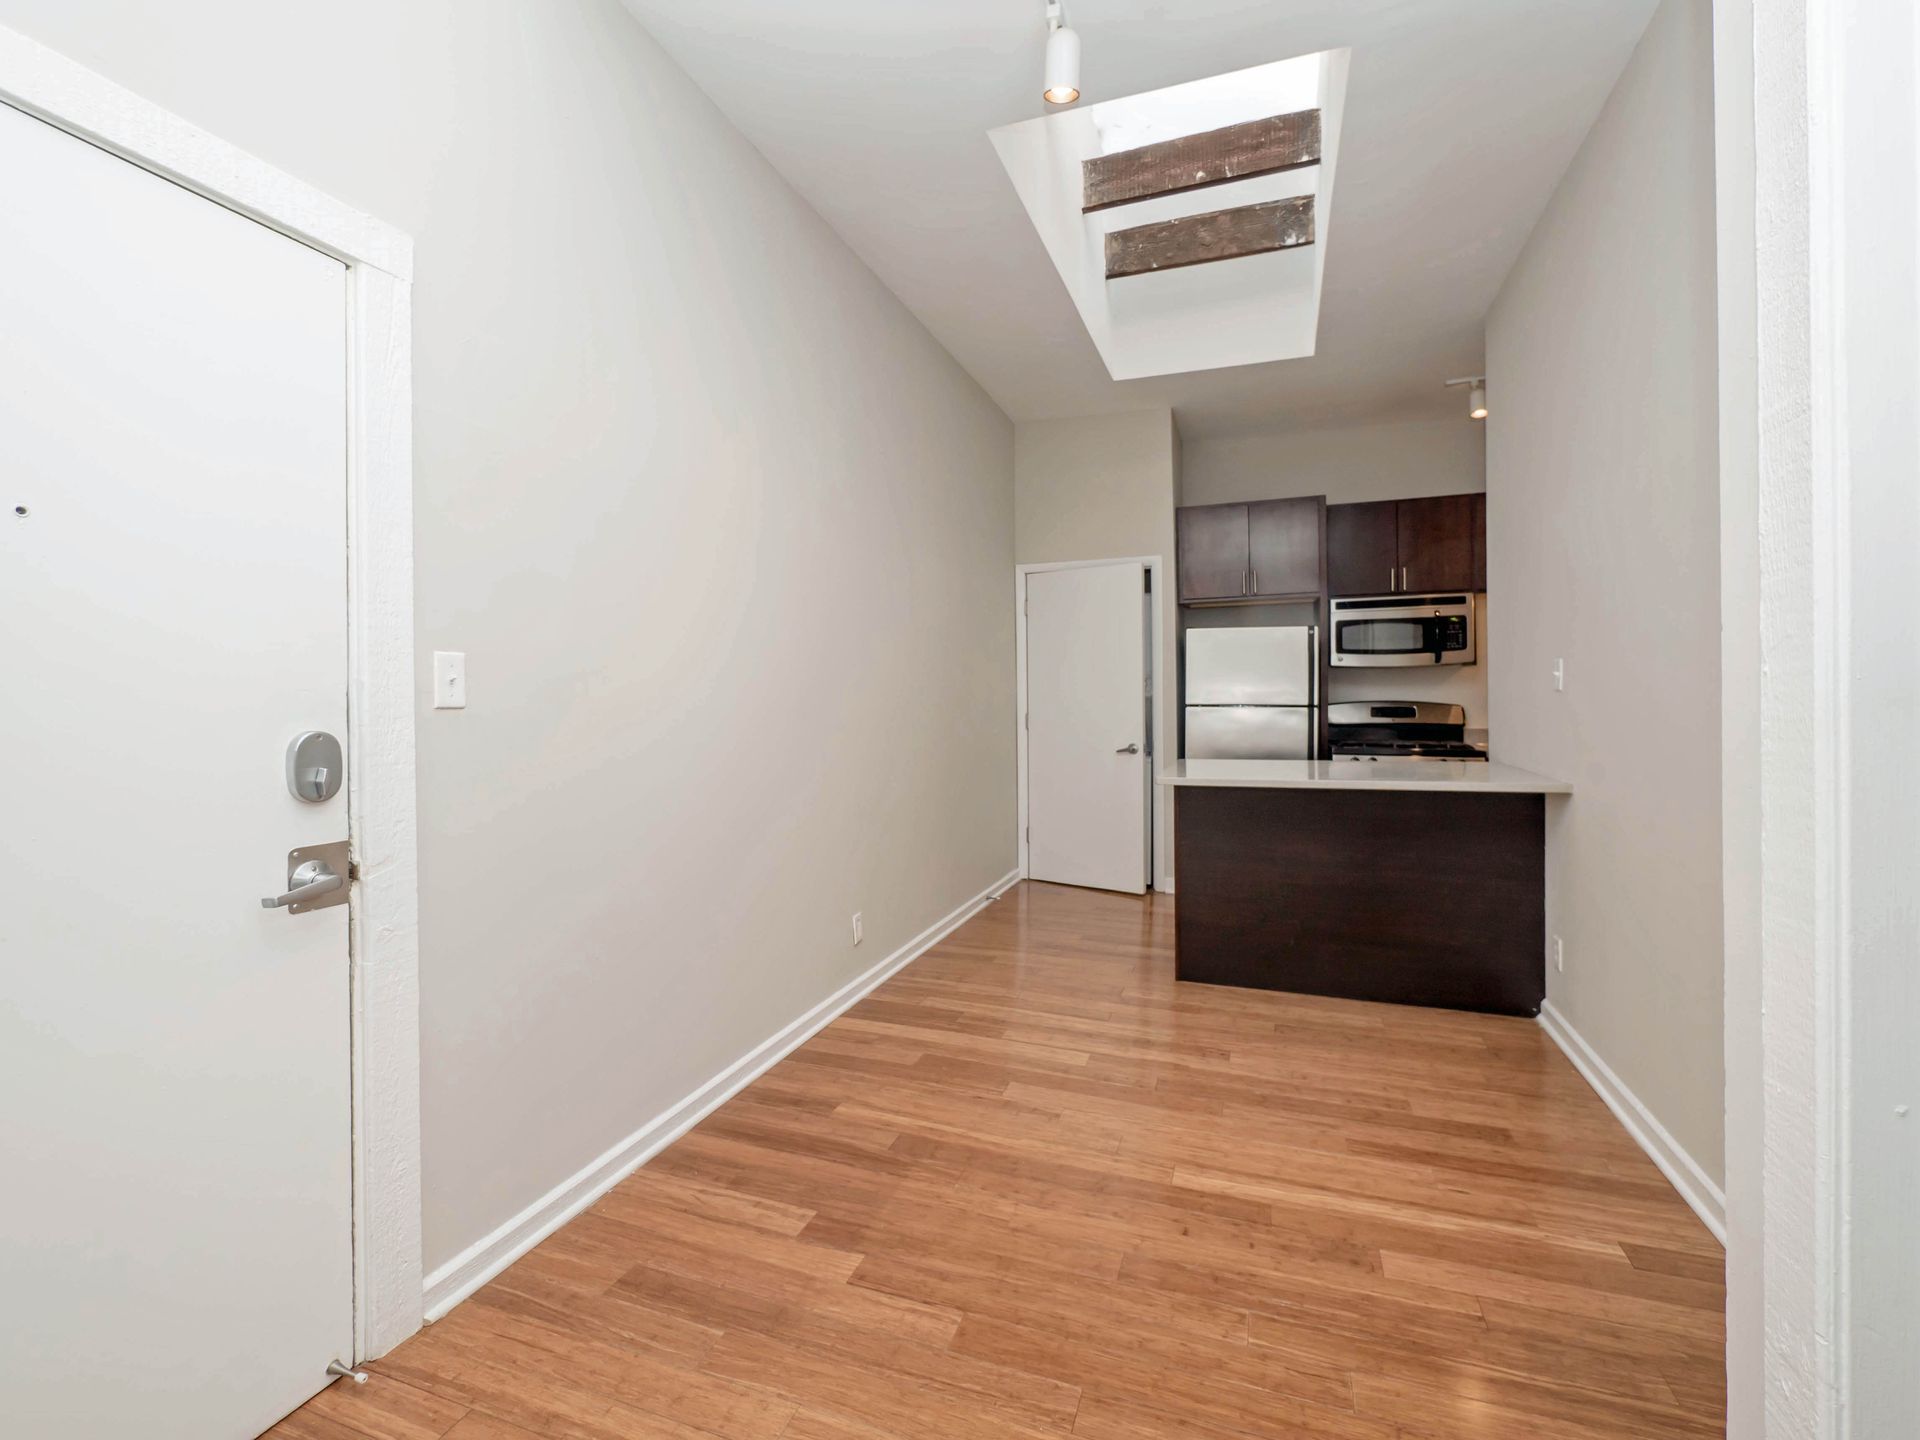 An empty apartment room with hardwood floors and a kitchen in the background.